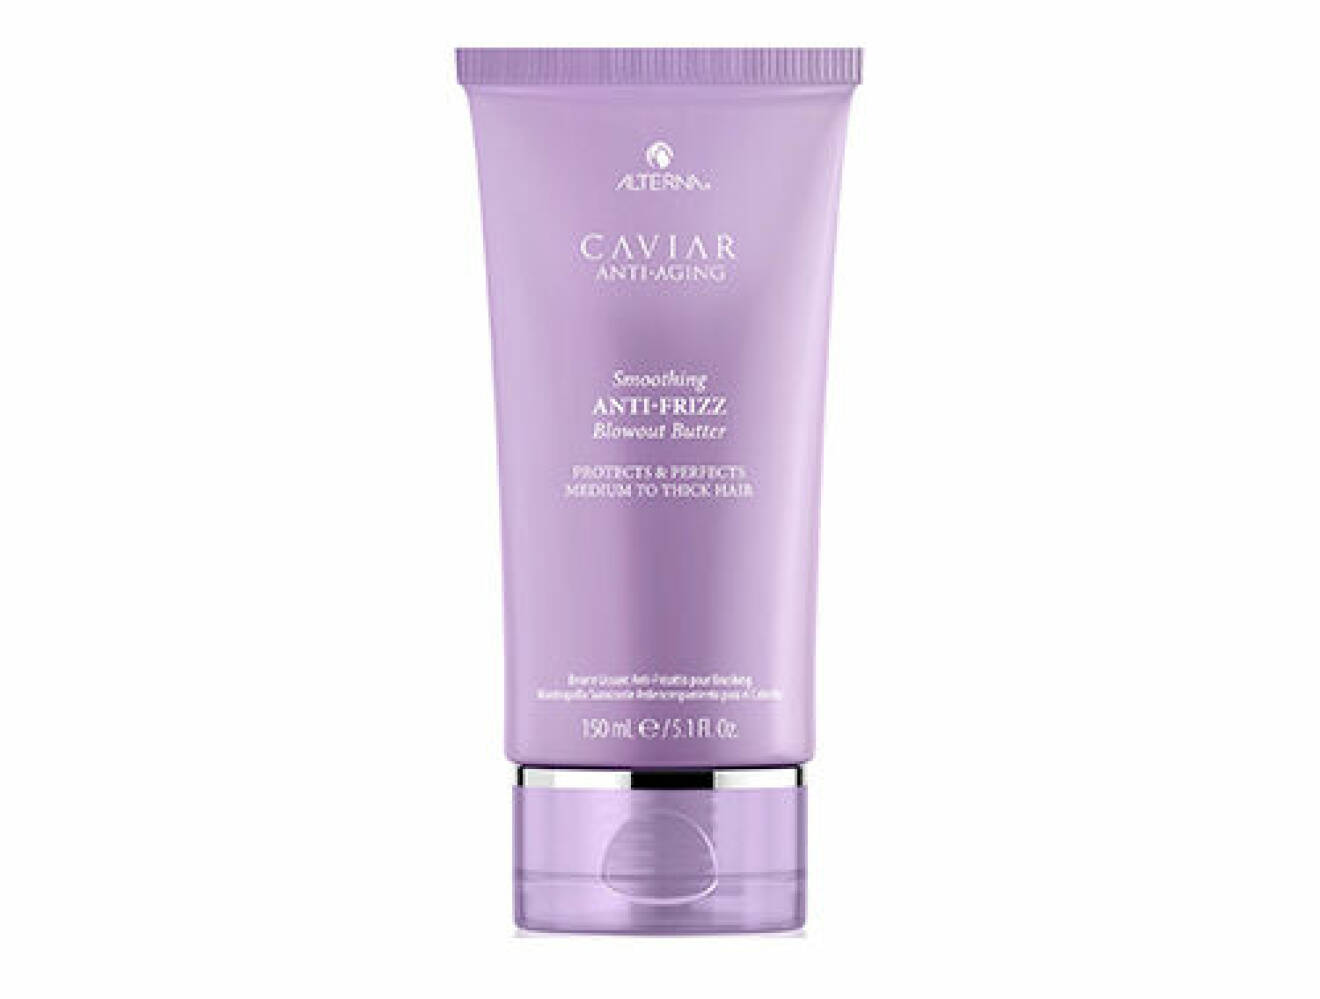 Alterna Caviar Anti-Aging Smoothing Anti-frizz Blowout Butter